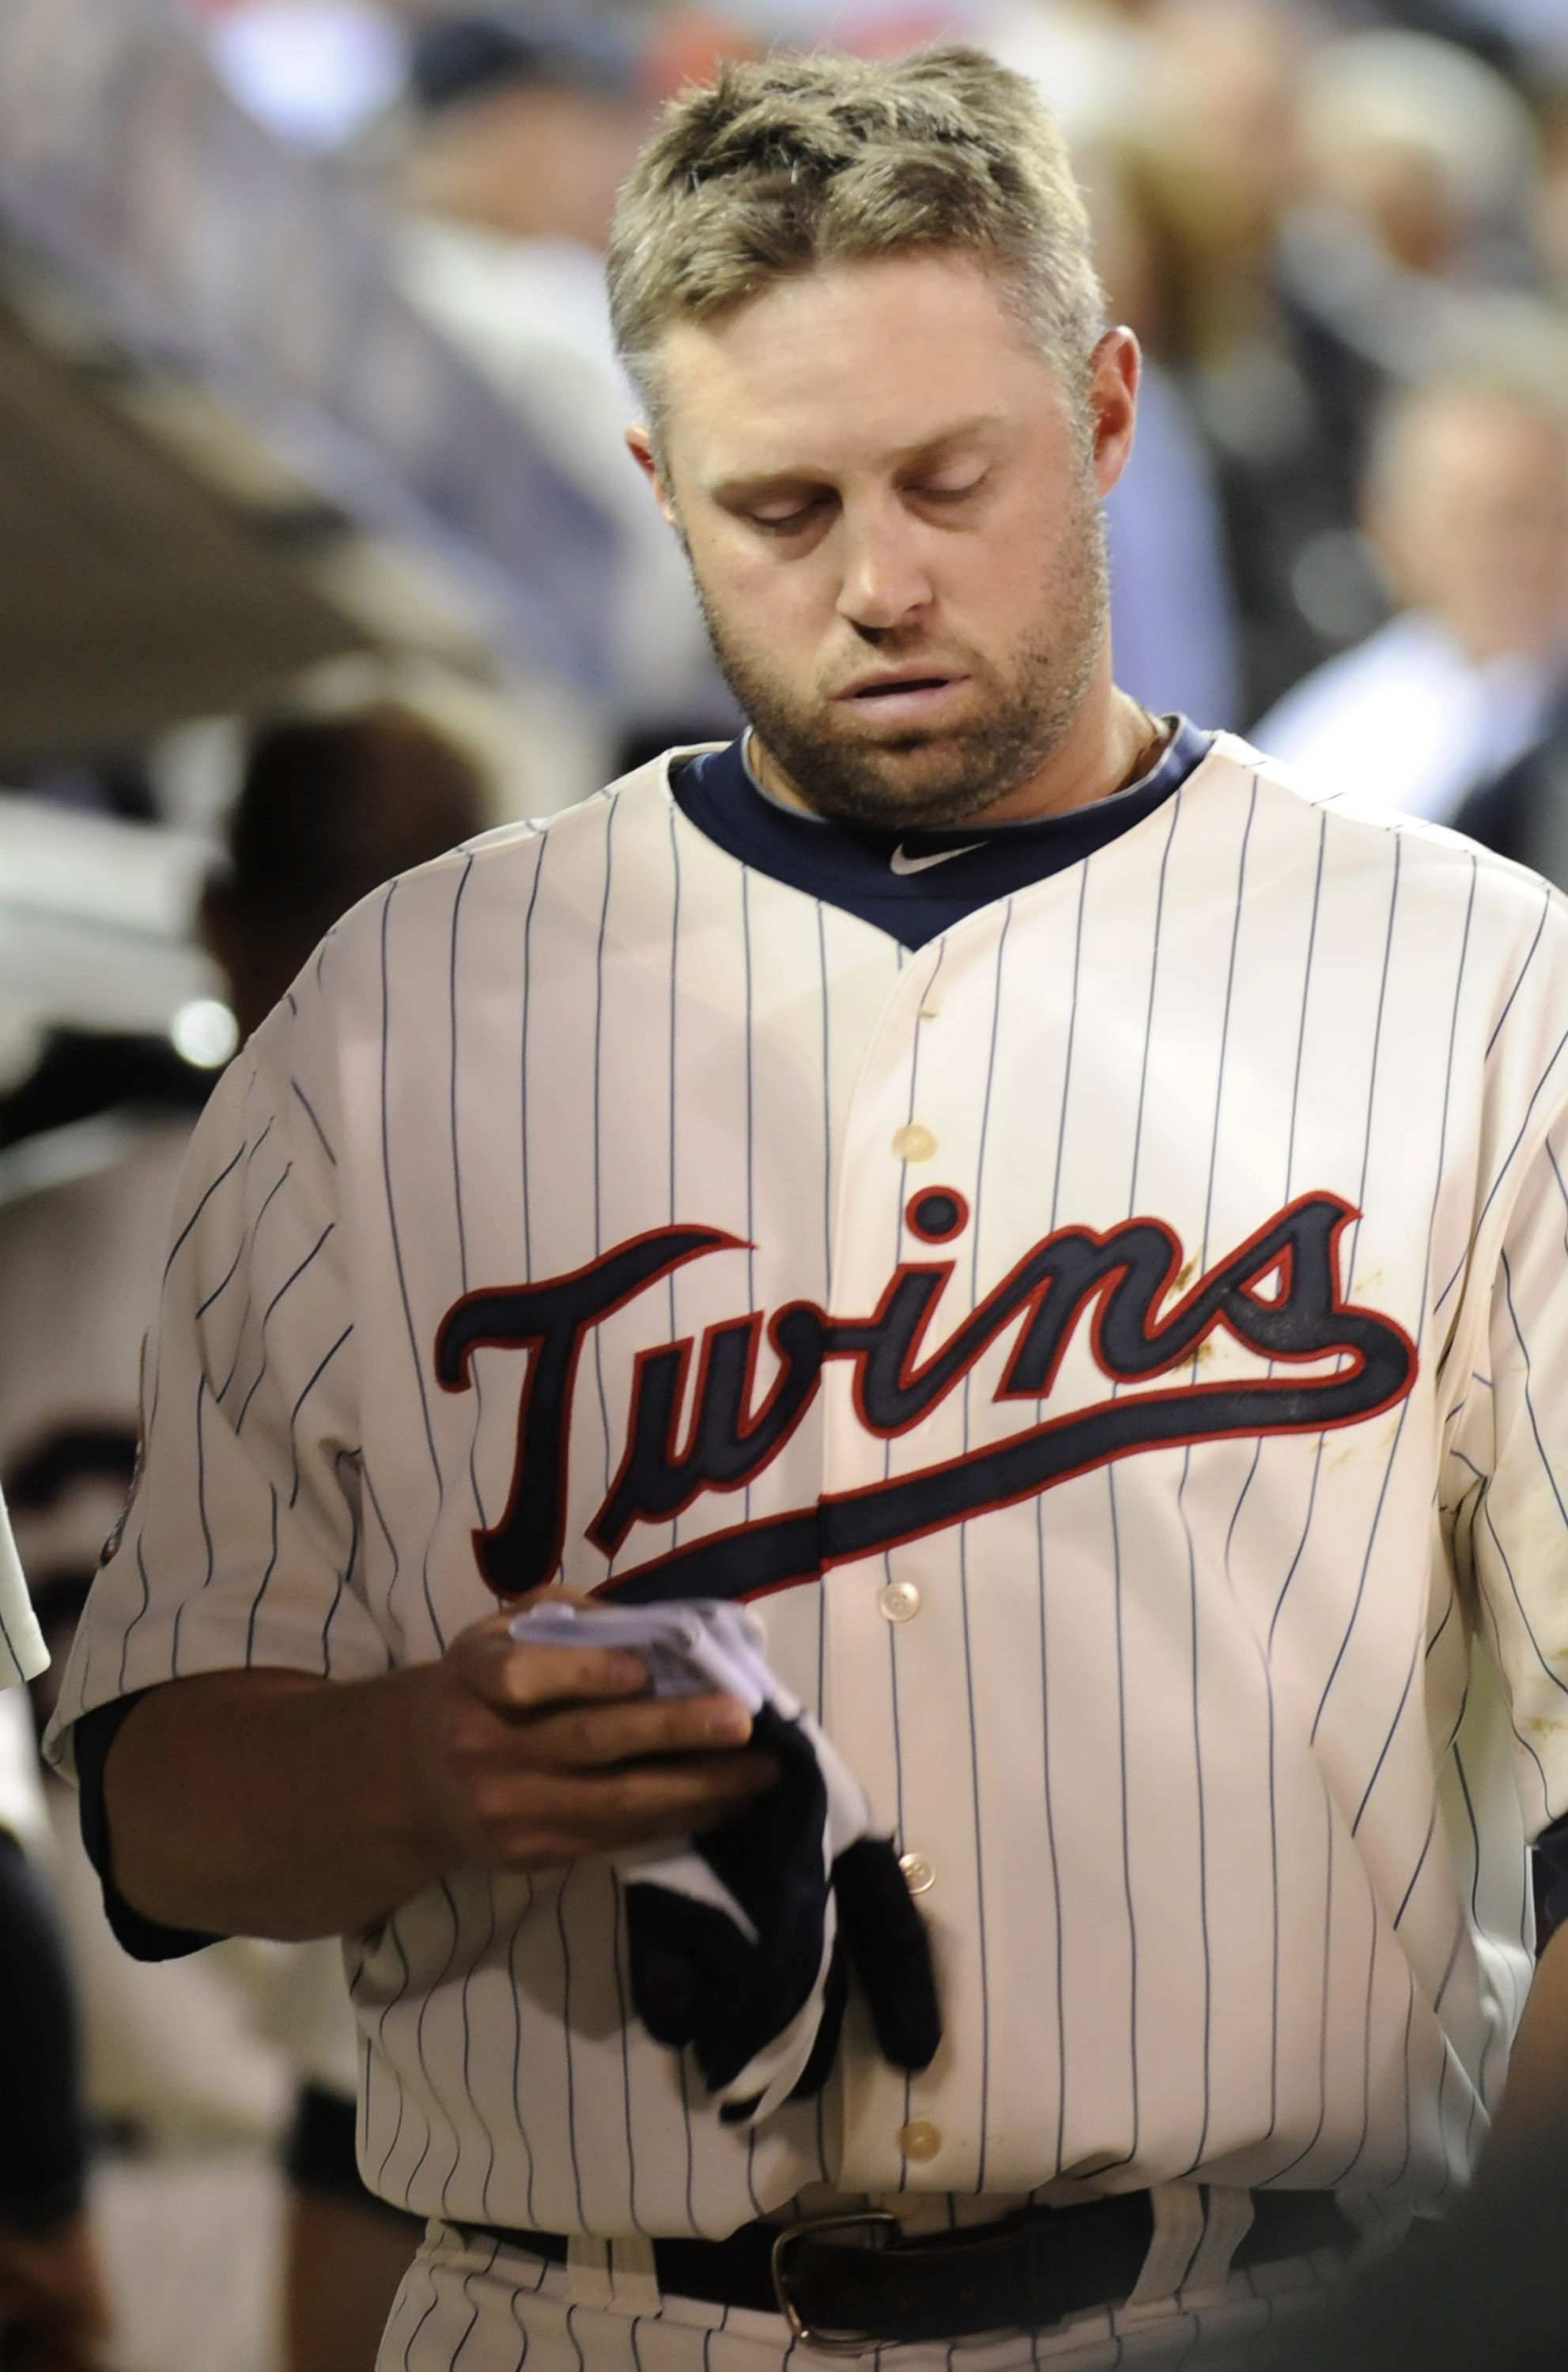 MINNEAPOLIS, MN - OCTOBER 7: Michael Cuddyer #5 of the Minnesota Twins in the dugout following a 2-5 loss to the New York Yankees in game two of the ALDS game on October 7, 2010 at Target Field in Minneapolis, Minnesota. (Photo by Hannah Foslien /Getty Im